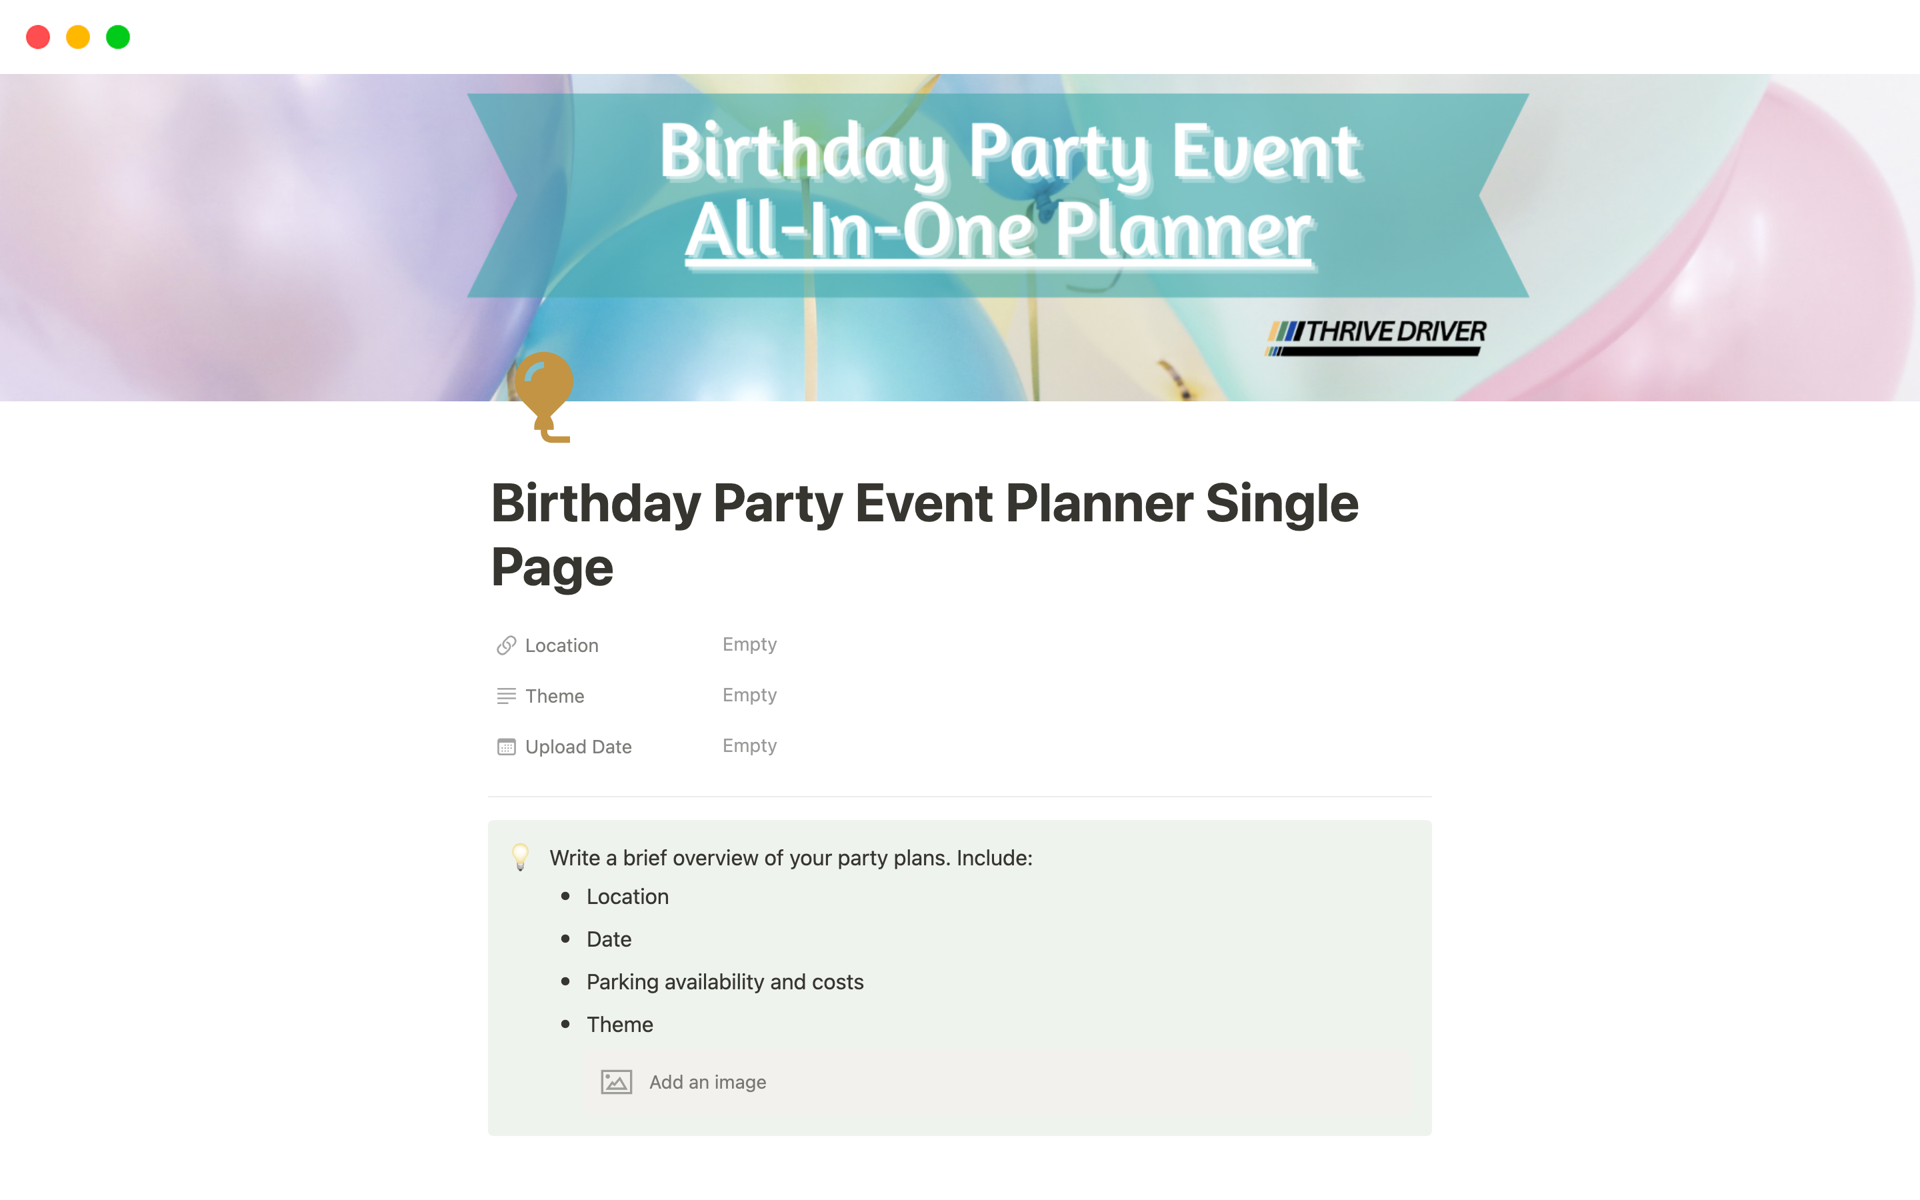 Birthday Party Event Planner Single Pageのテンプレートのプレビュー